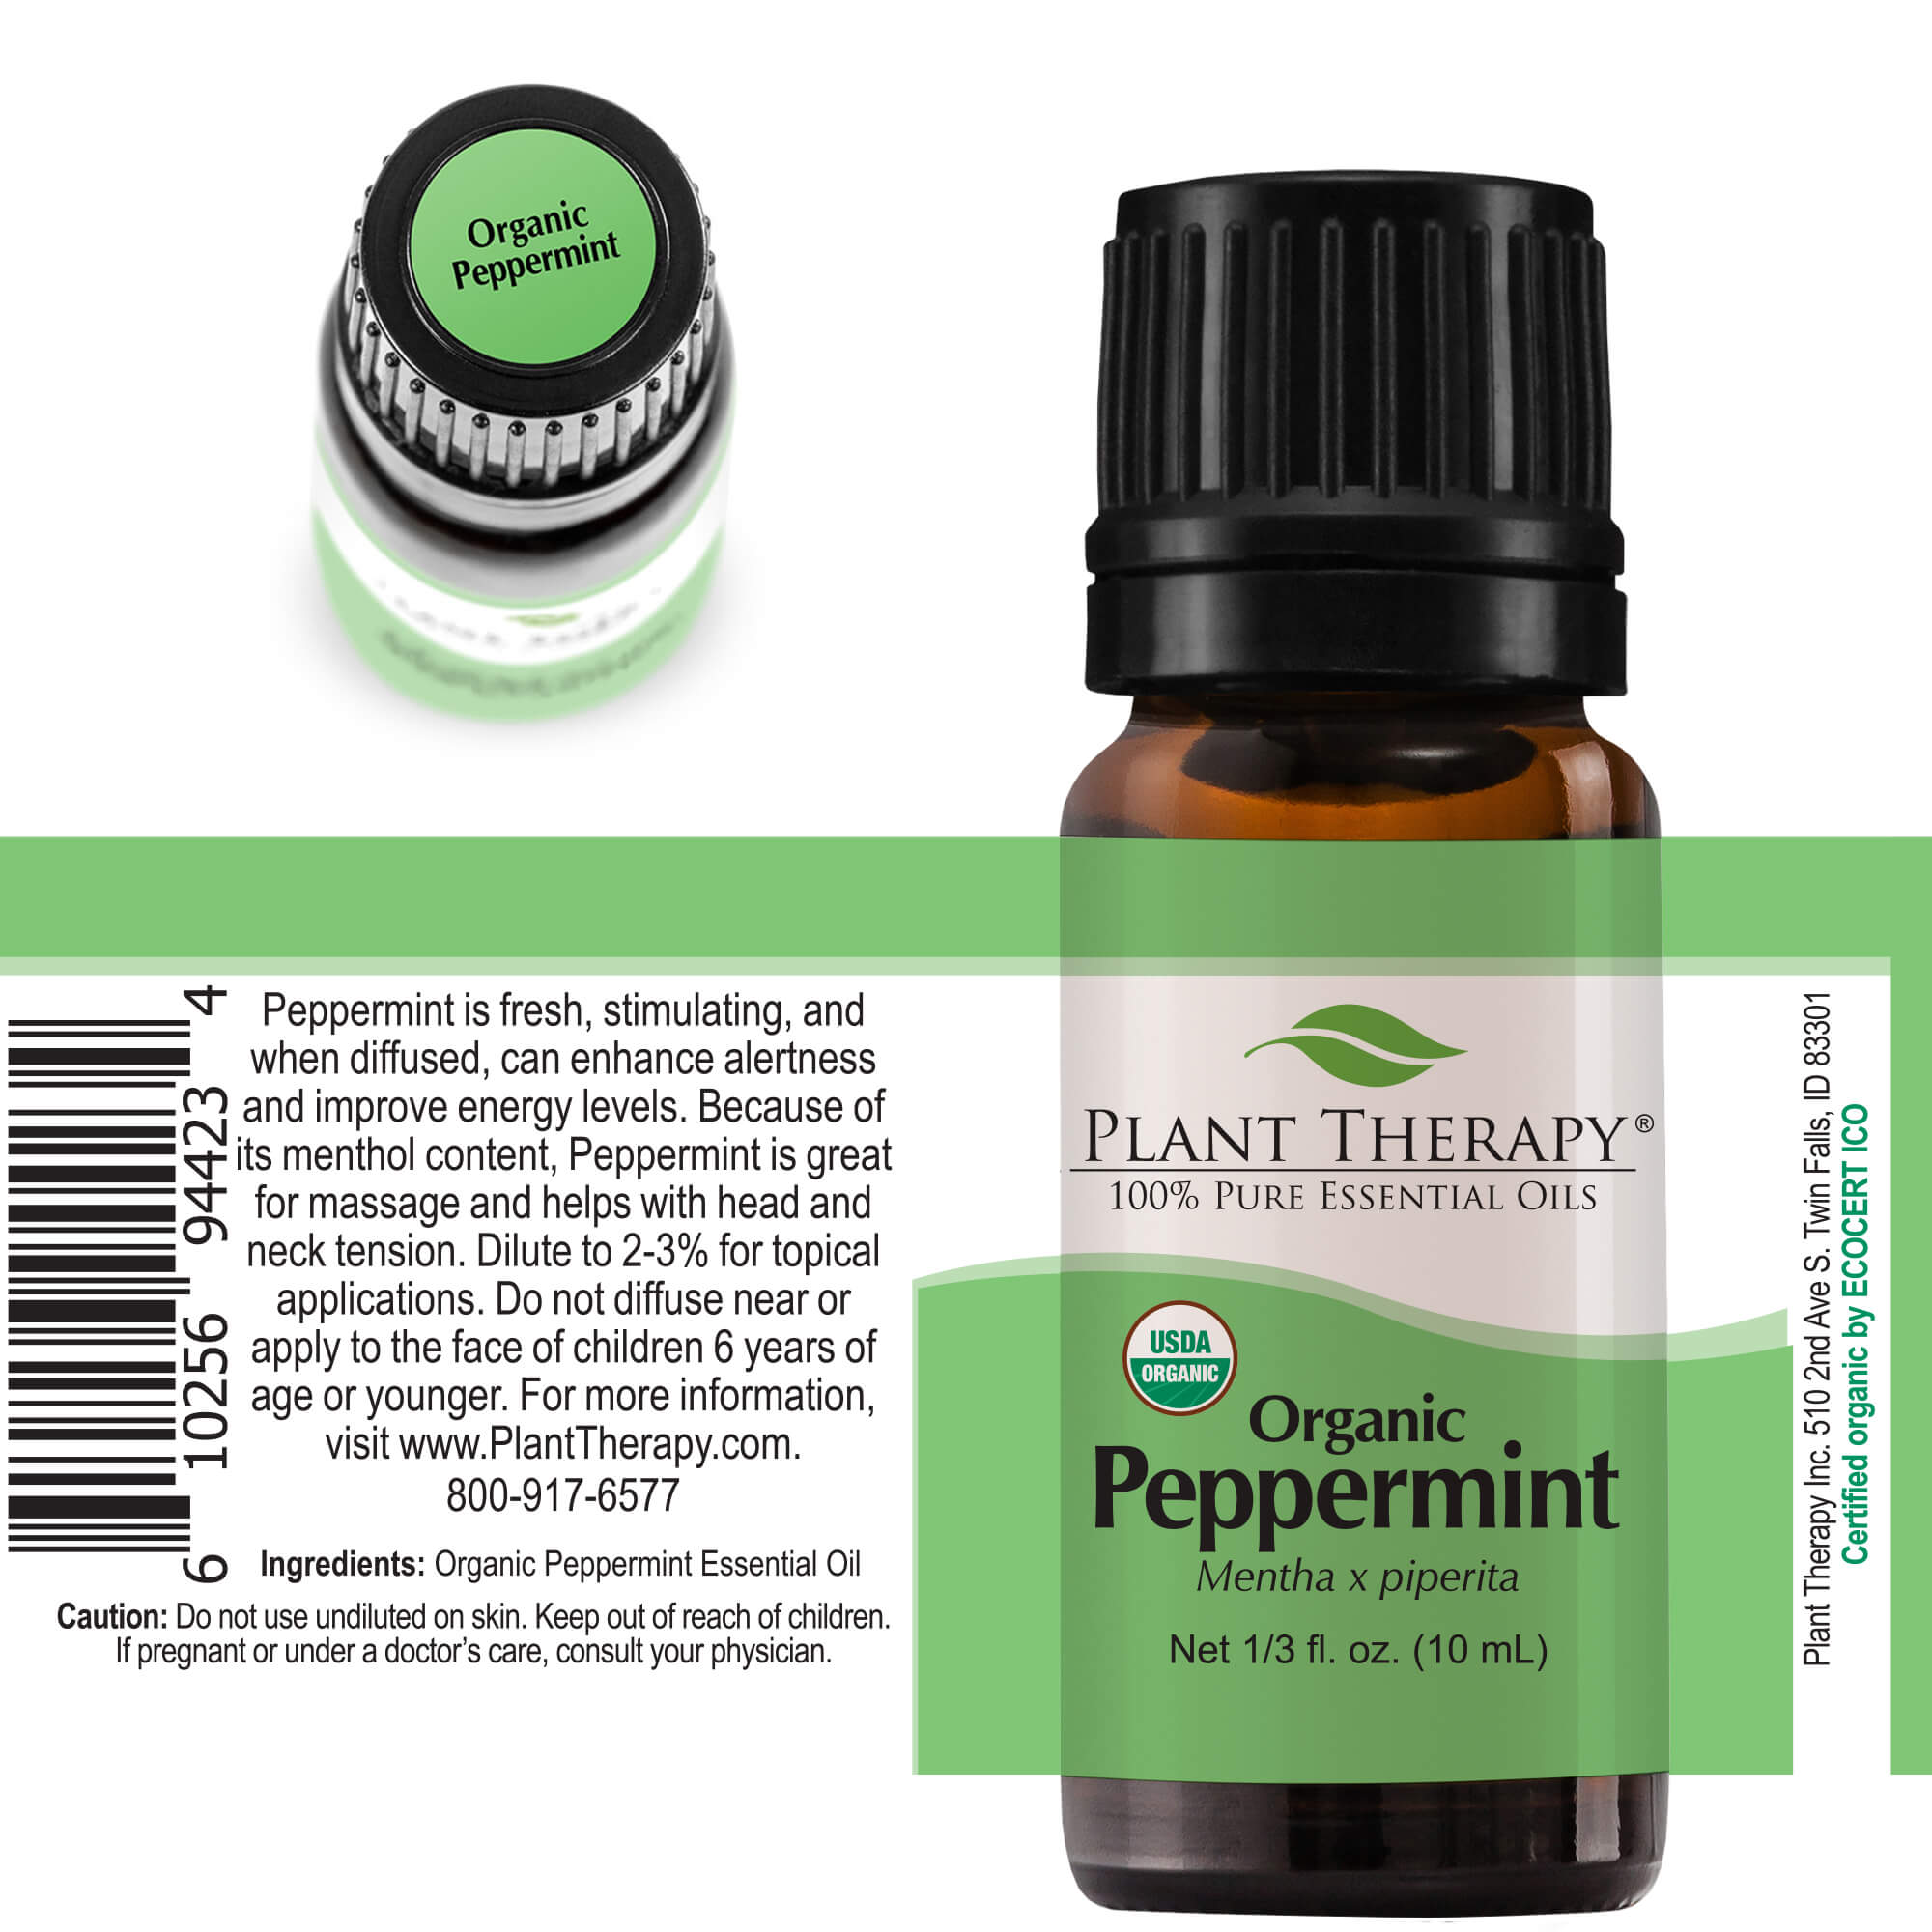 Plant Therapy USDA Organic Peppermint Essential 10 ml (1/3 oz) Oil 100% Pure, Undiluted for Energy & Pain - image 3 of 7